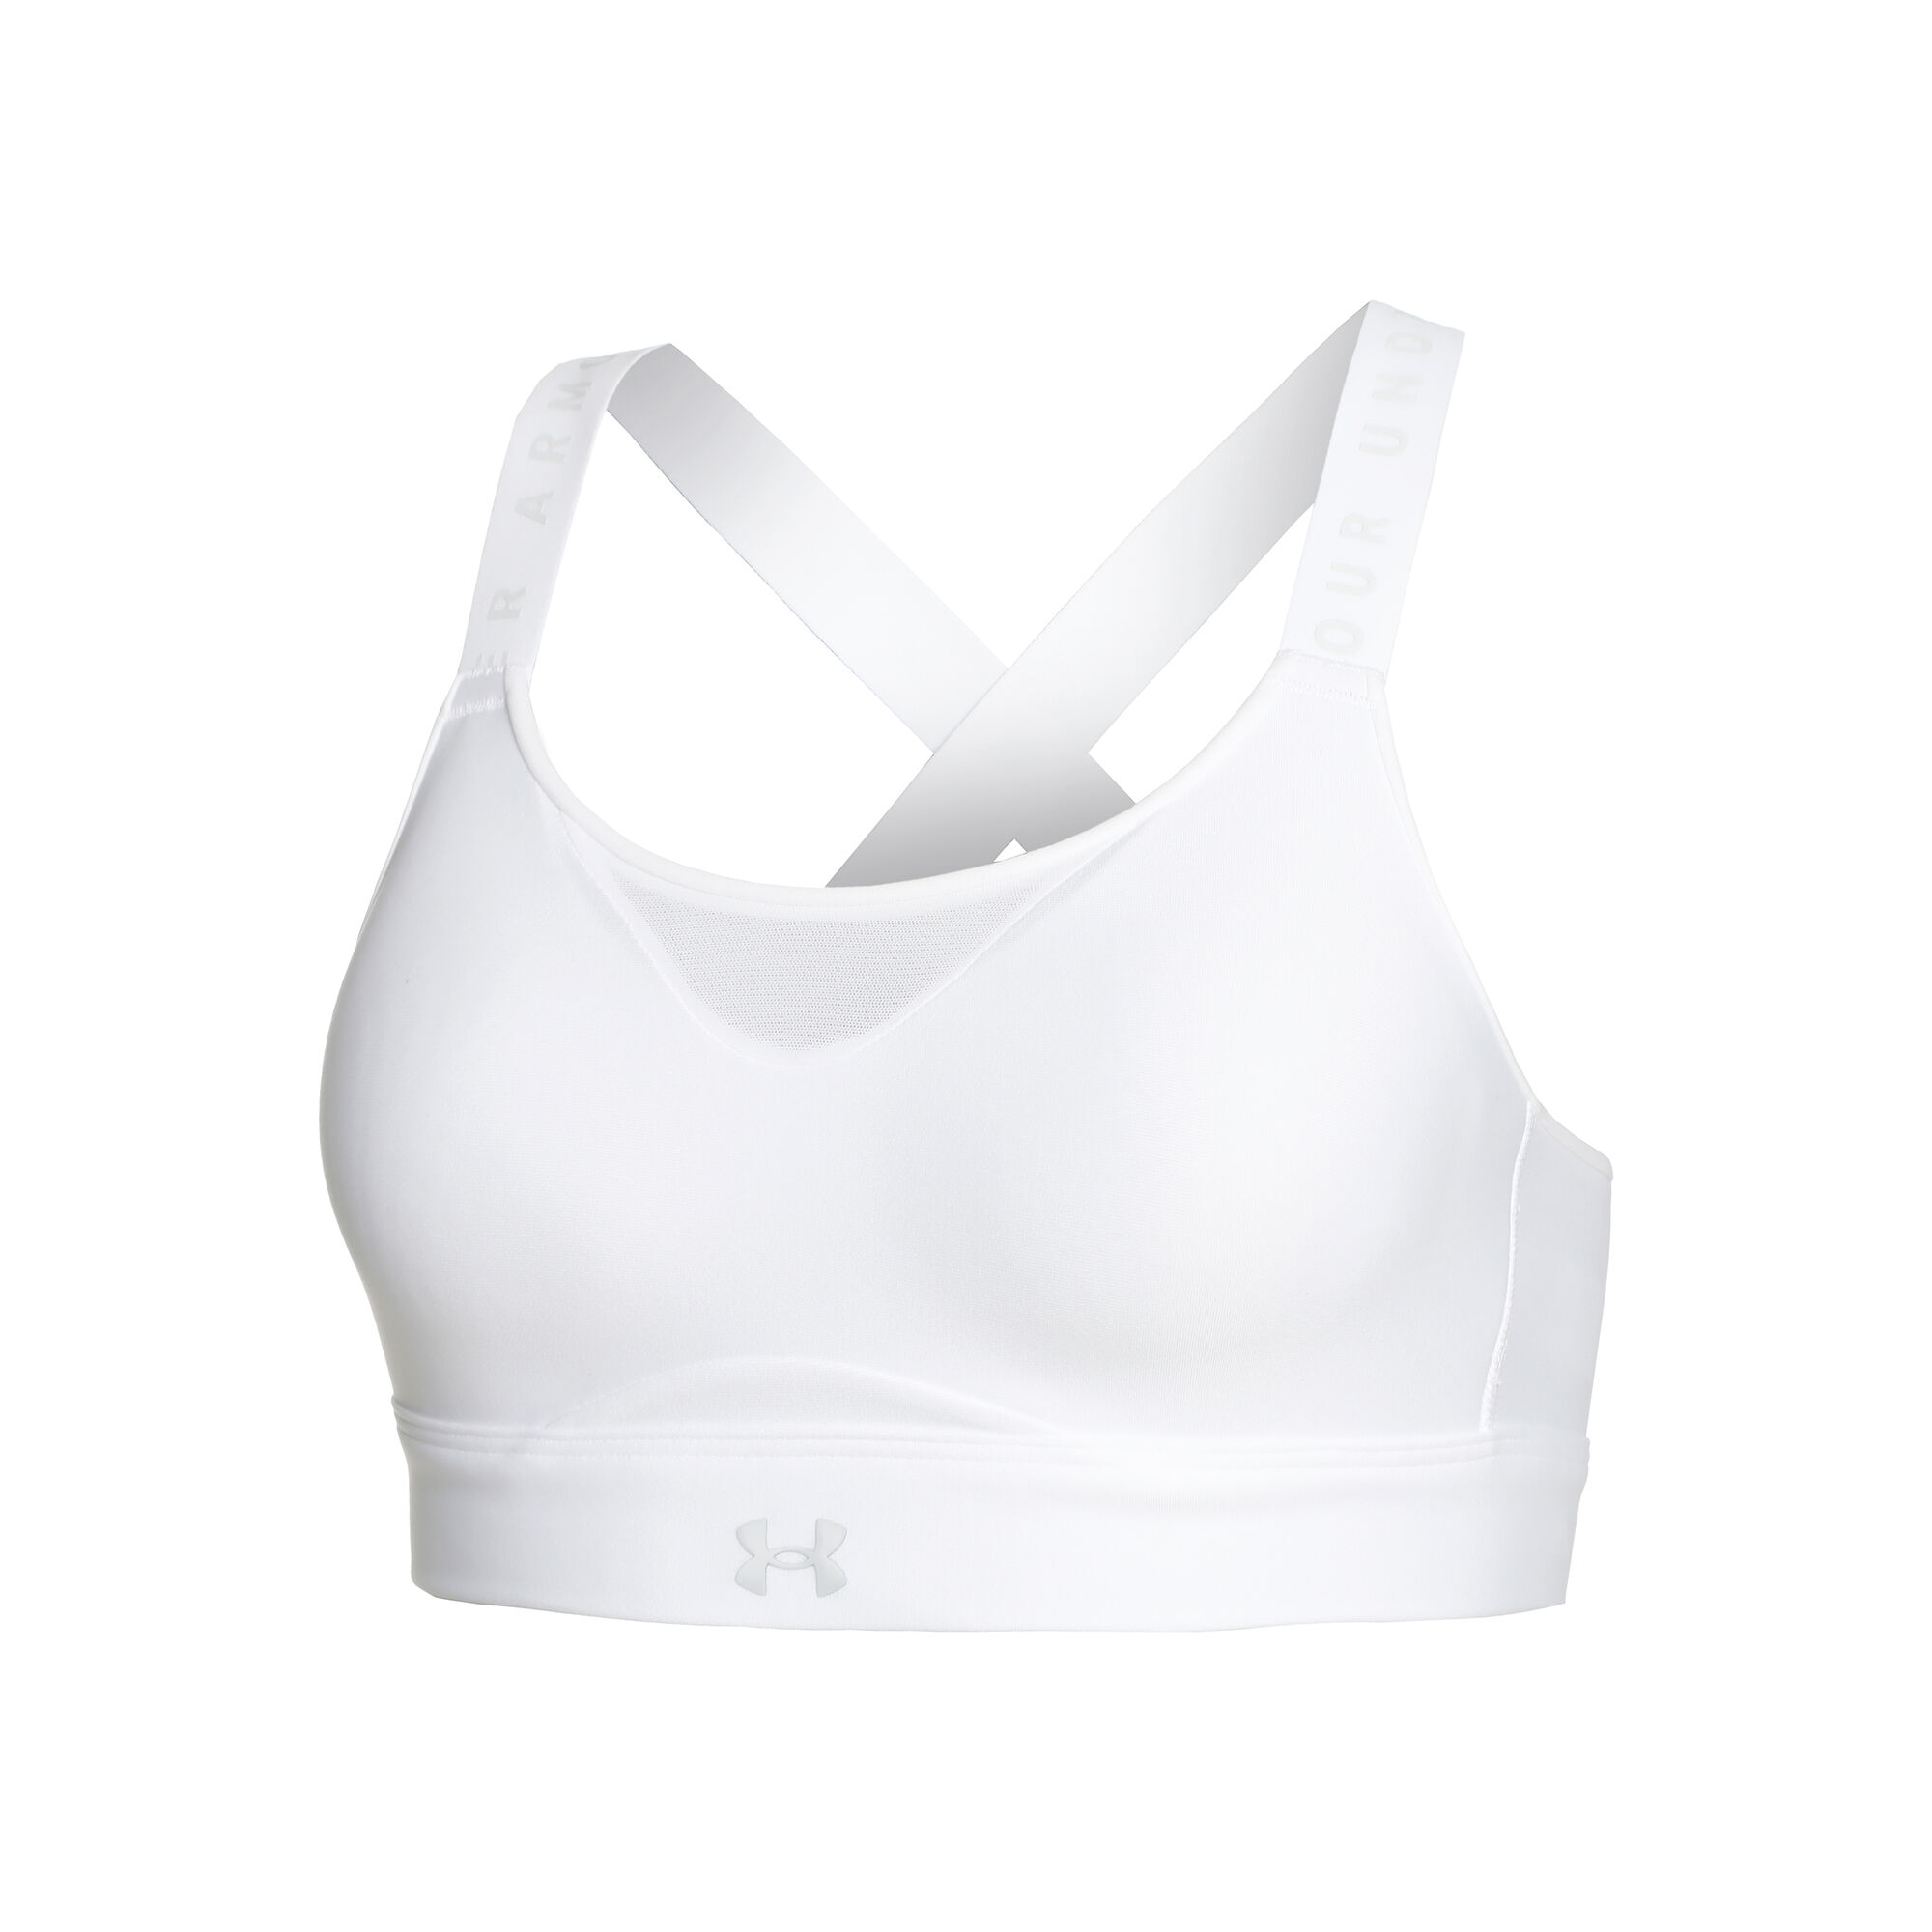 Buy Under Armour Infinity High Sports Bras Women White online